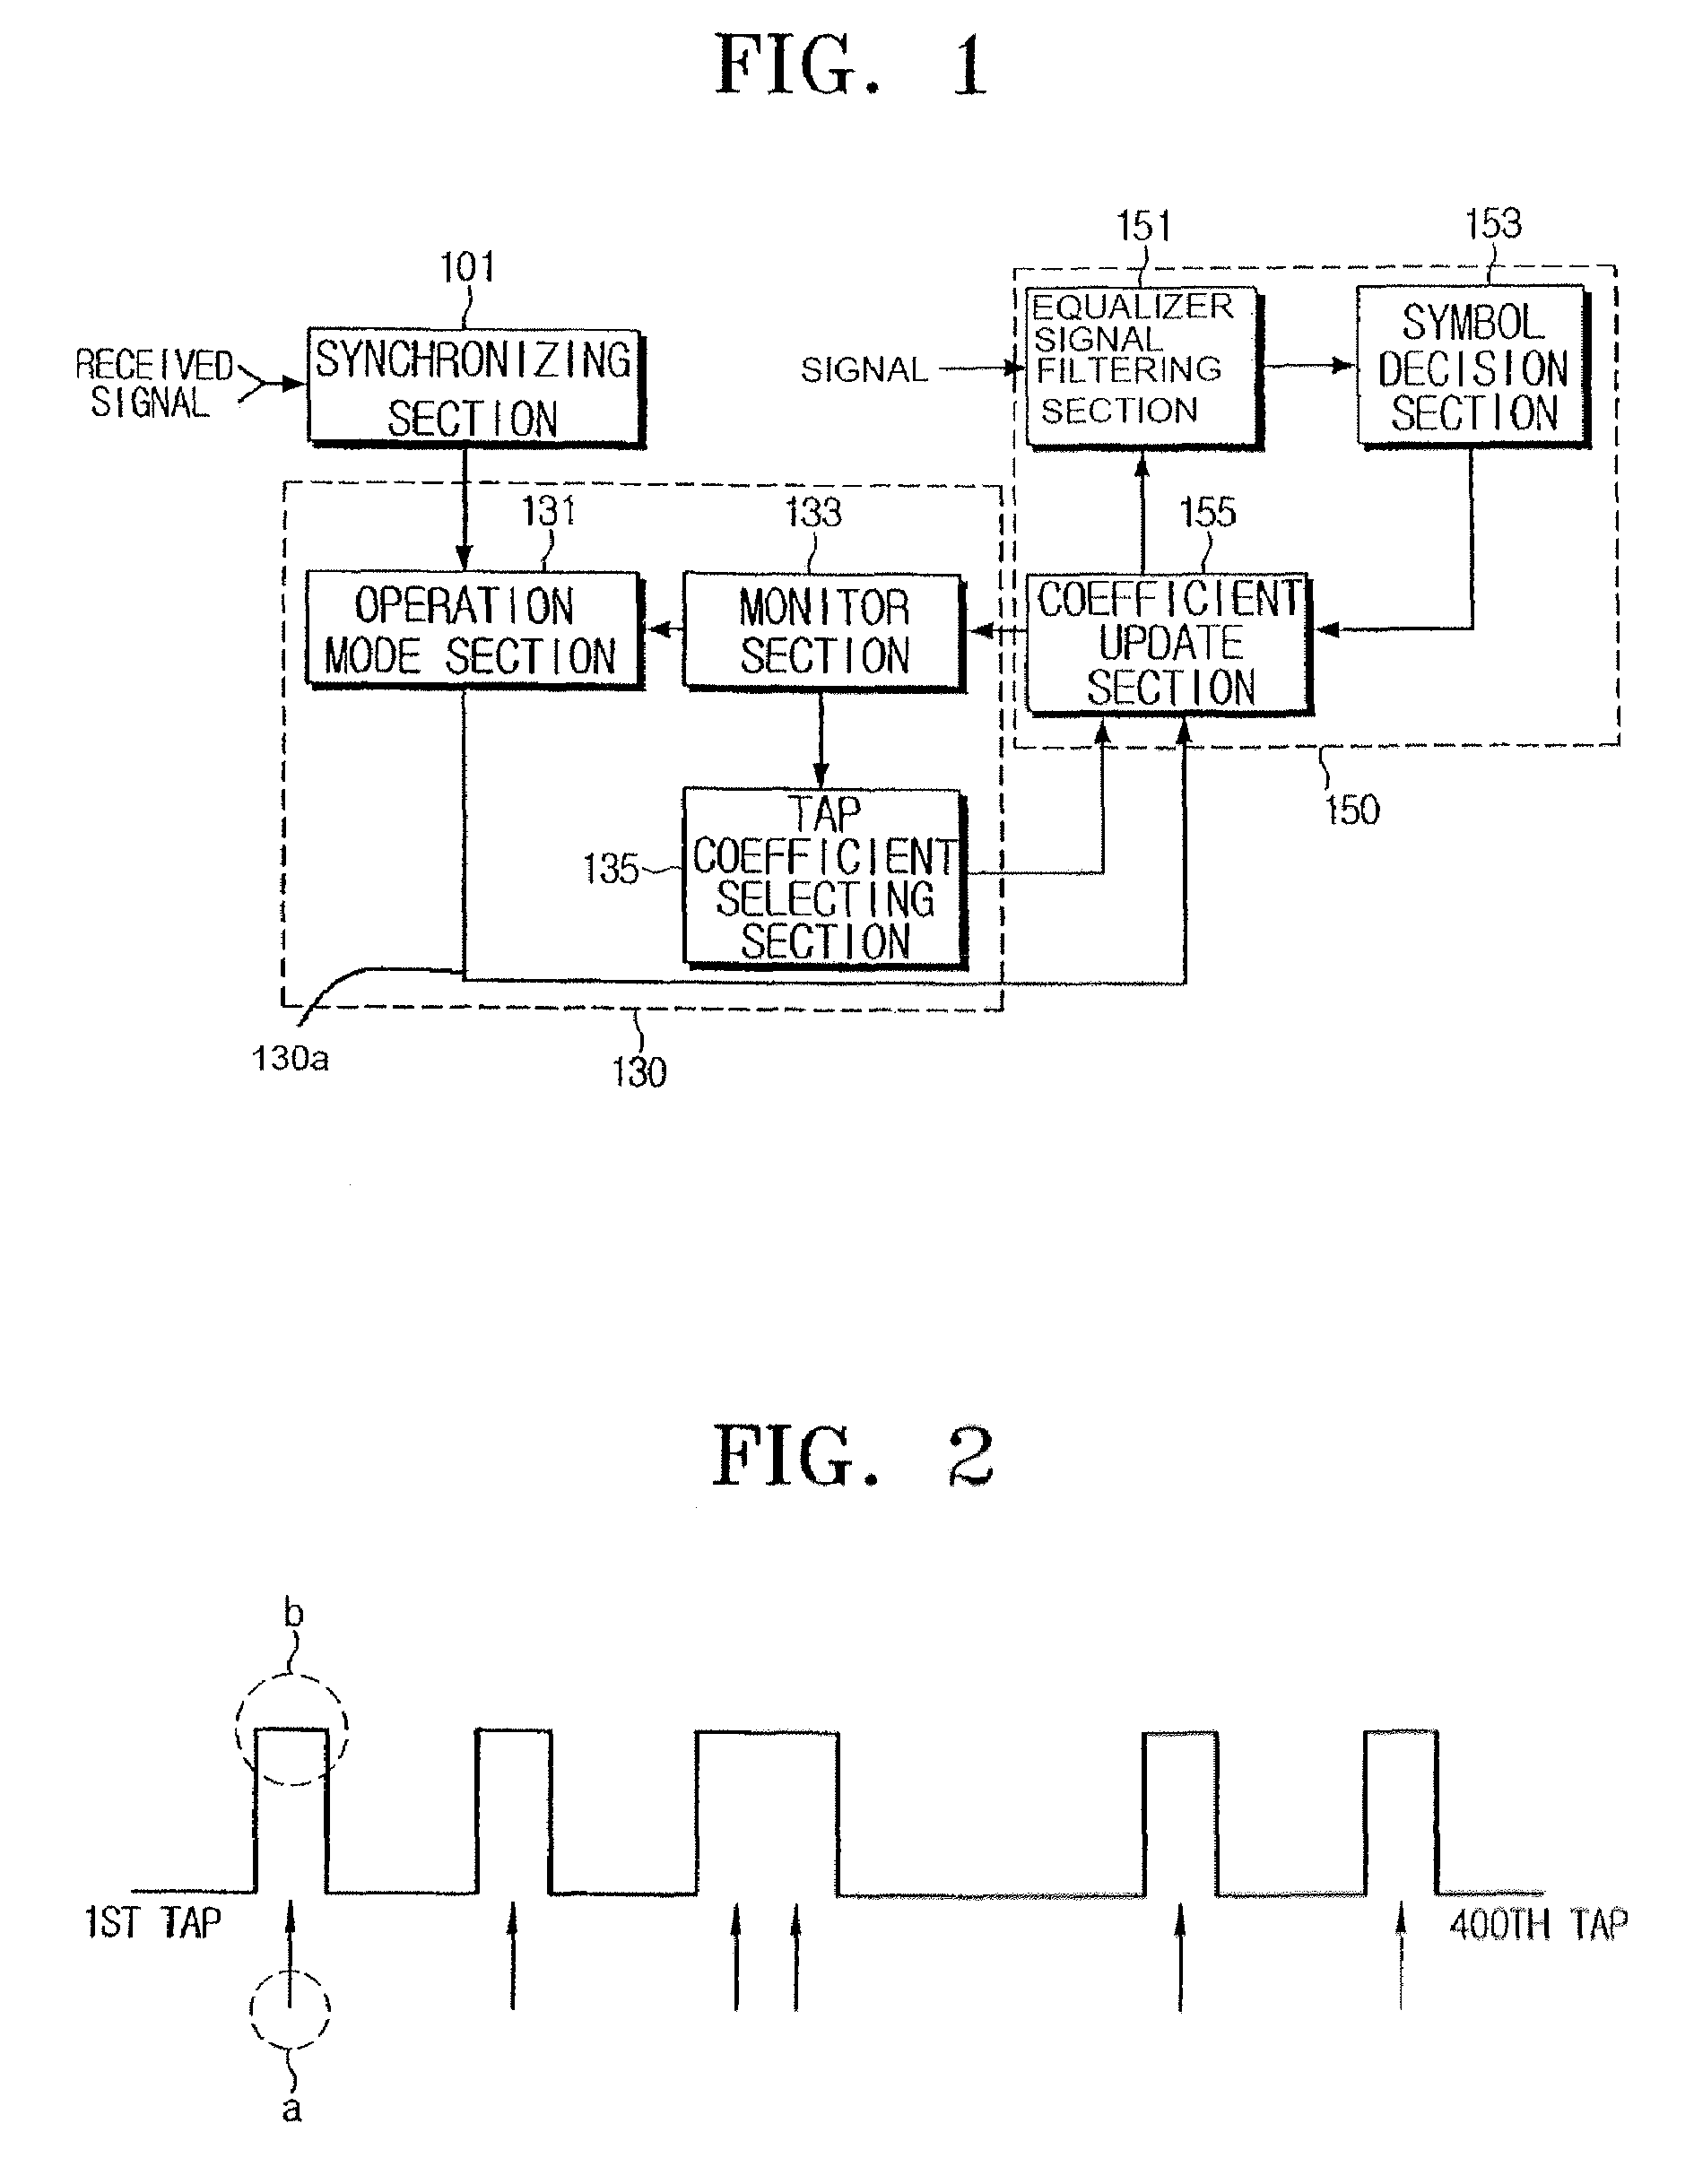 Method and apparatus to control operation of an equalizer